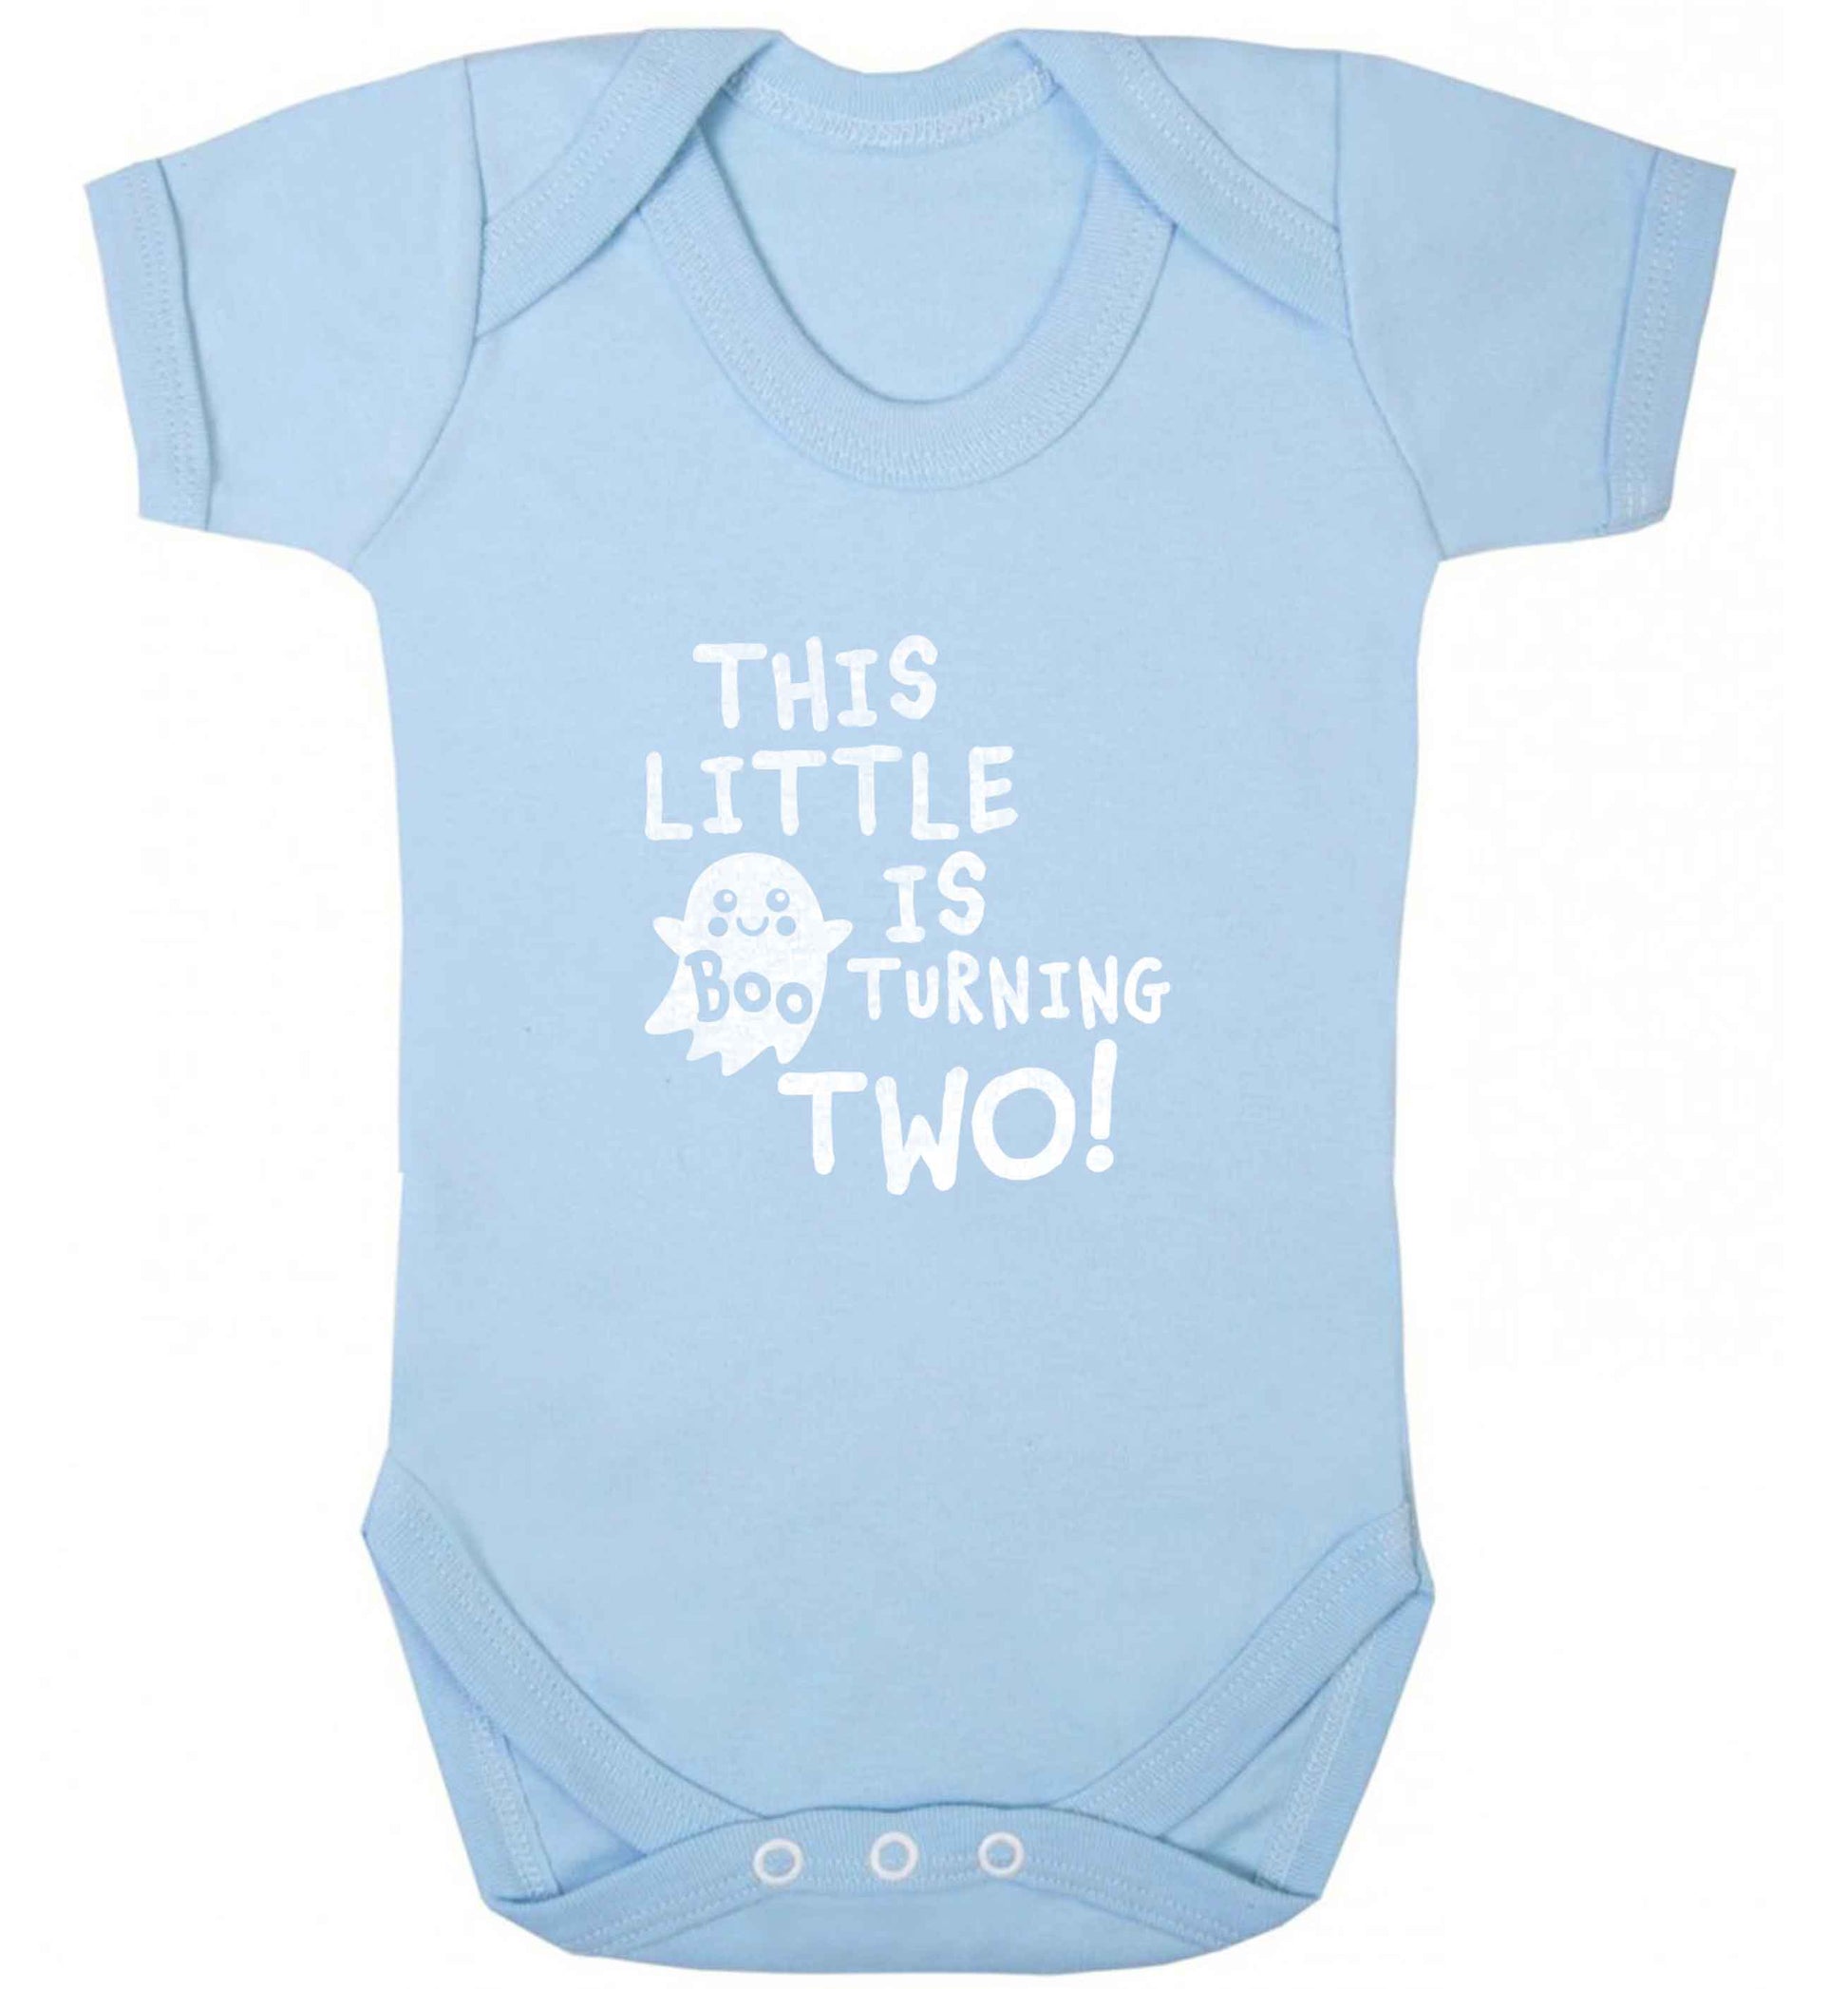 This little boo is turning two baby vest pale blue 18-24 months